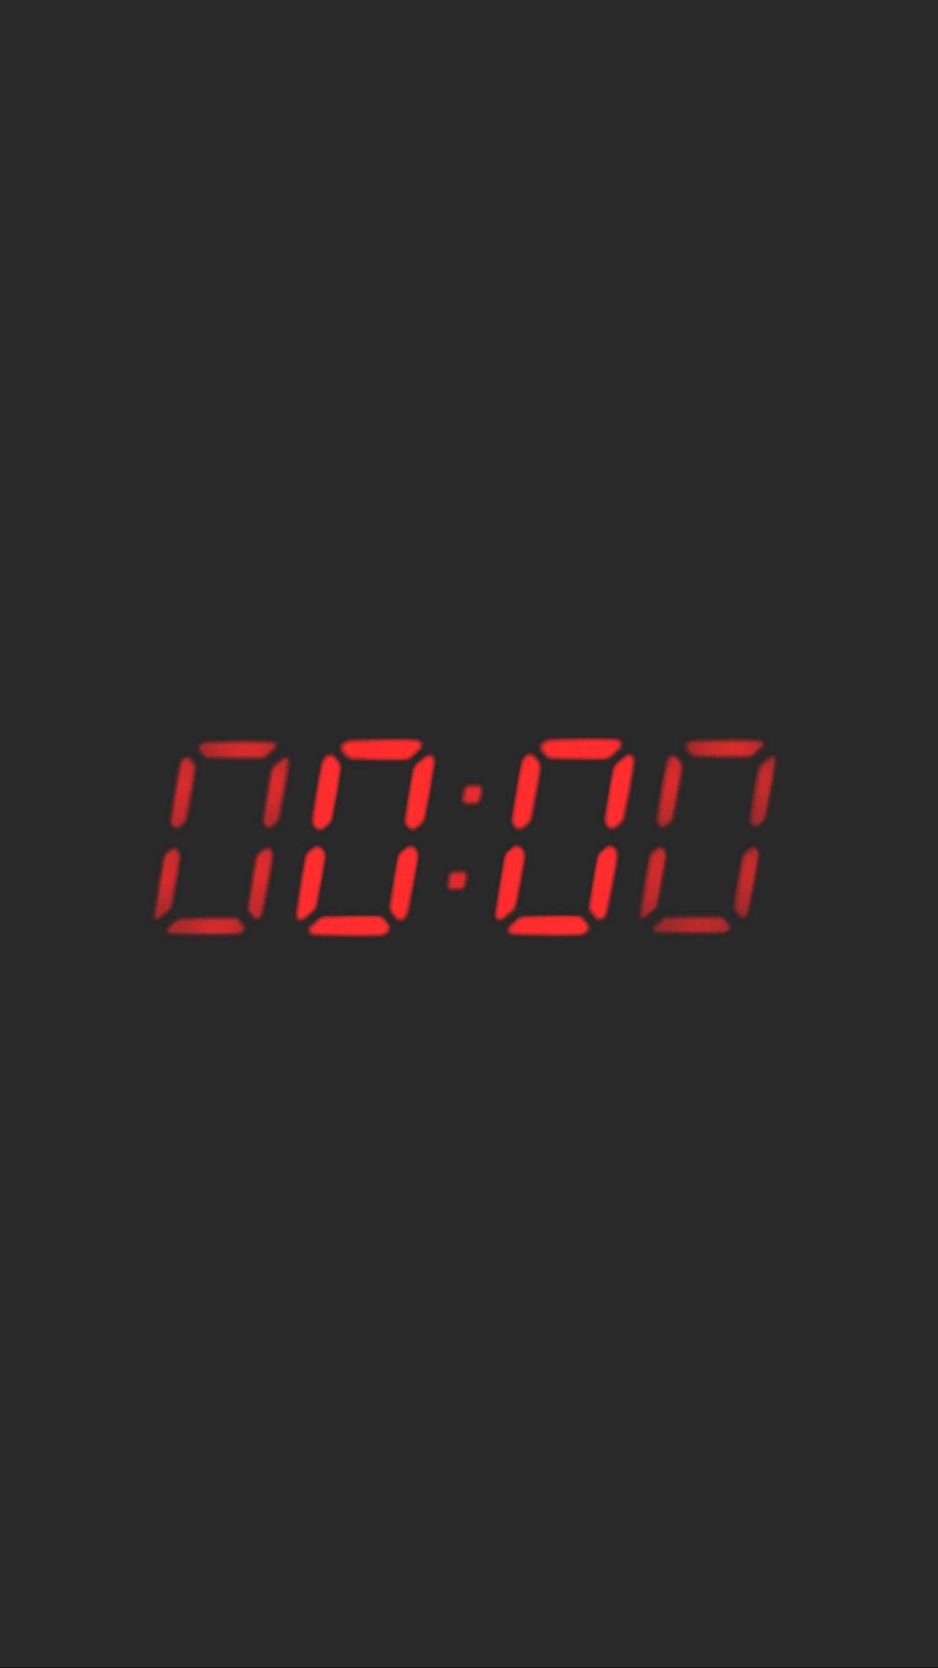 Black clock live wallpaper PRO » Apk Thing - Android Apps Free Download